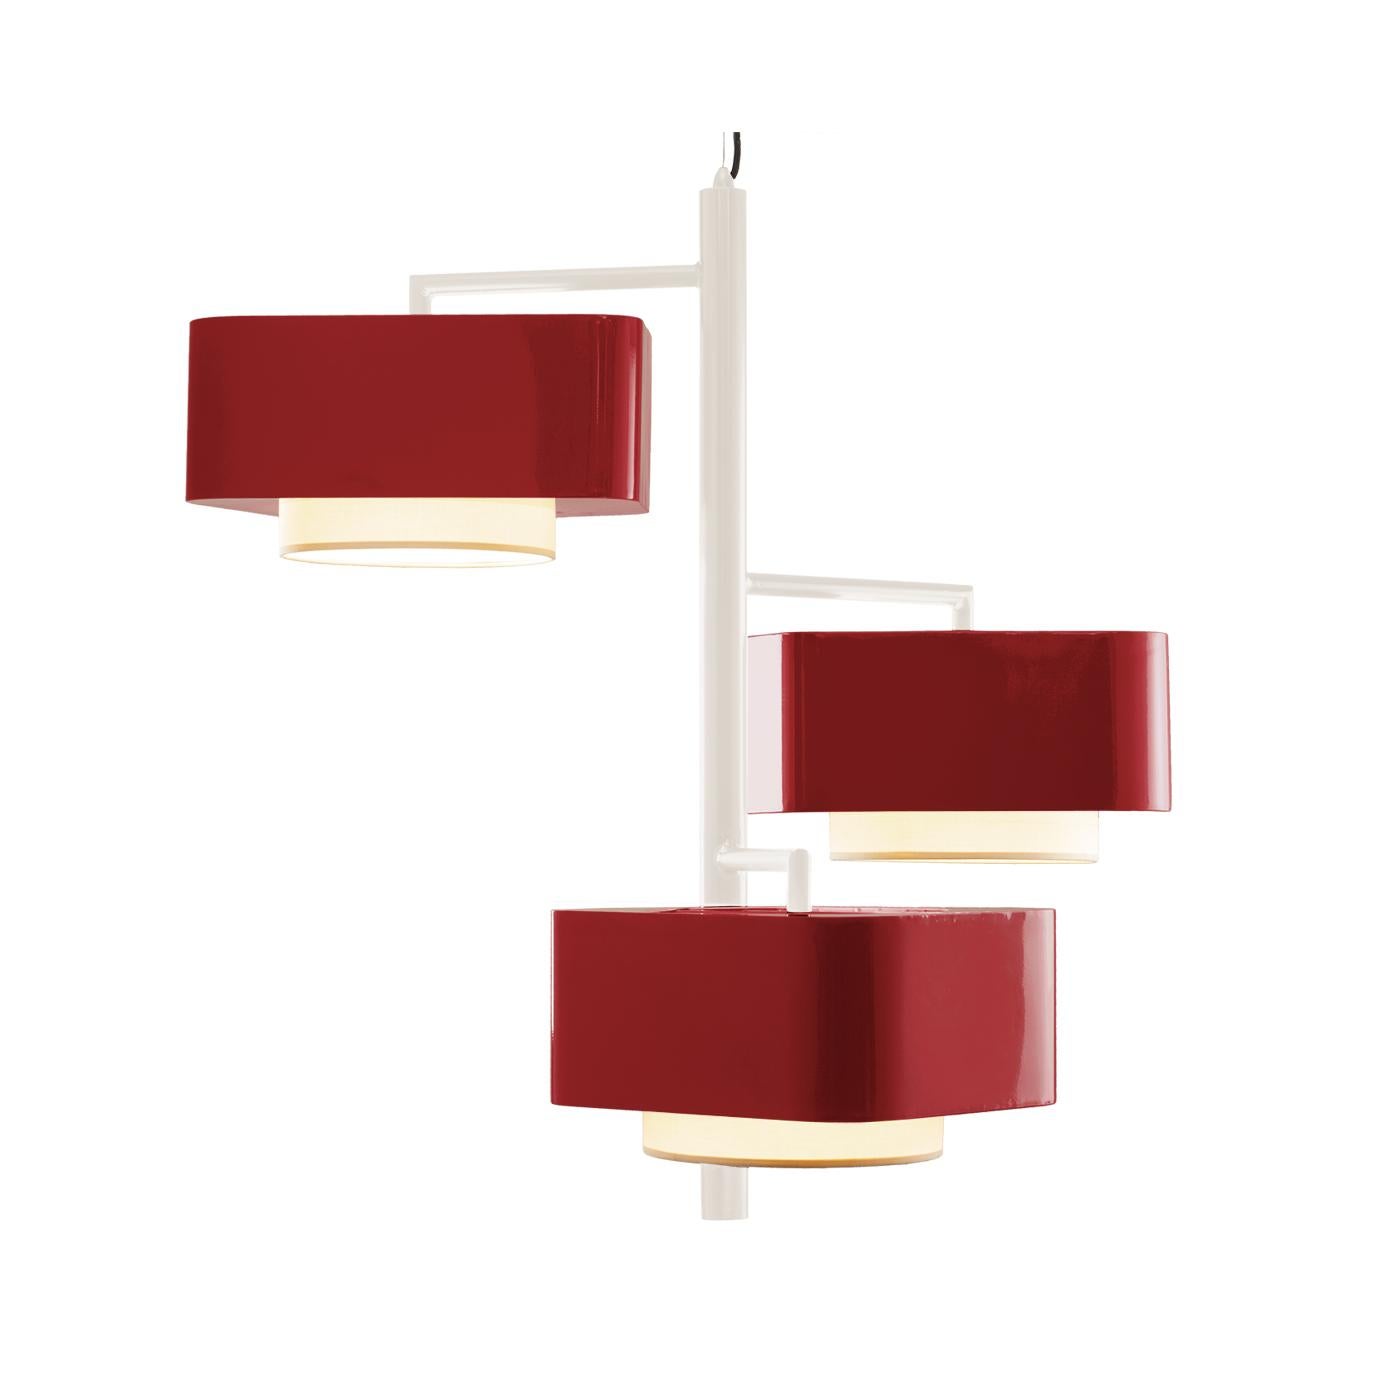 Contemporary Art Deco inspired Carousel I Pendant Lamp in Lipstick Red In New Condition For Sale In Lisbon, PT